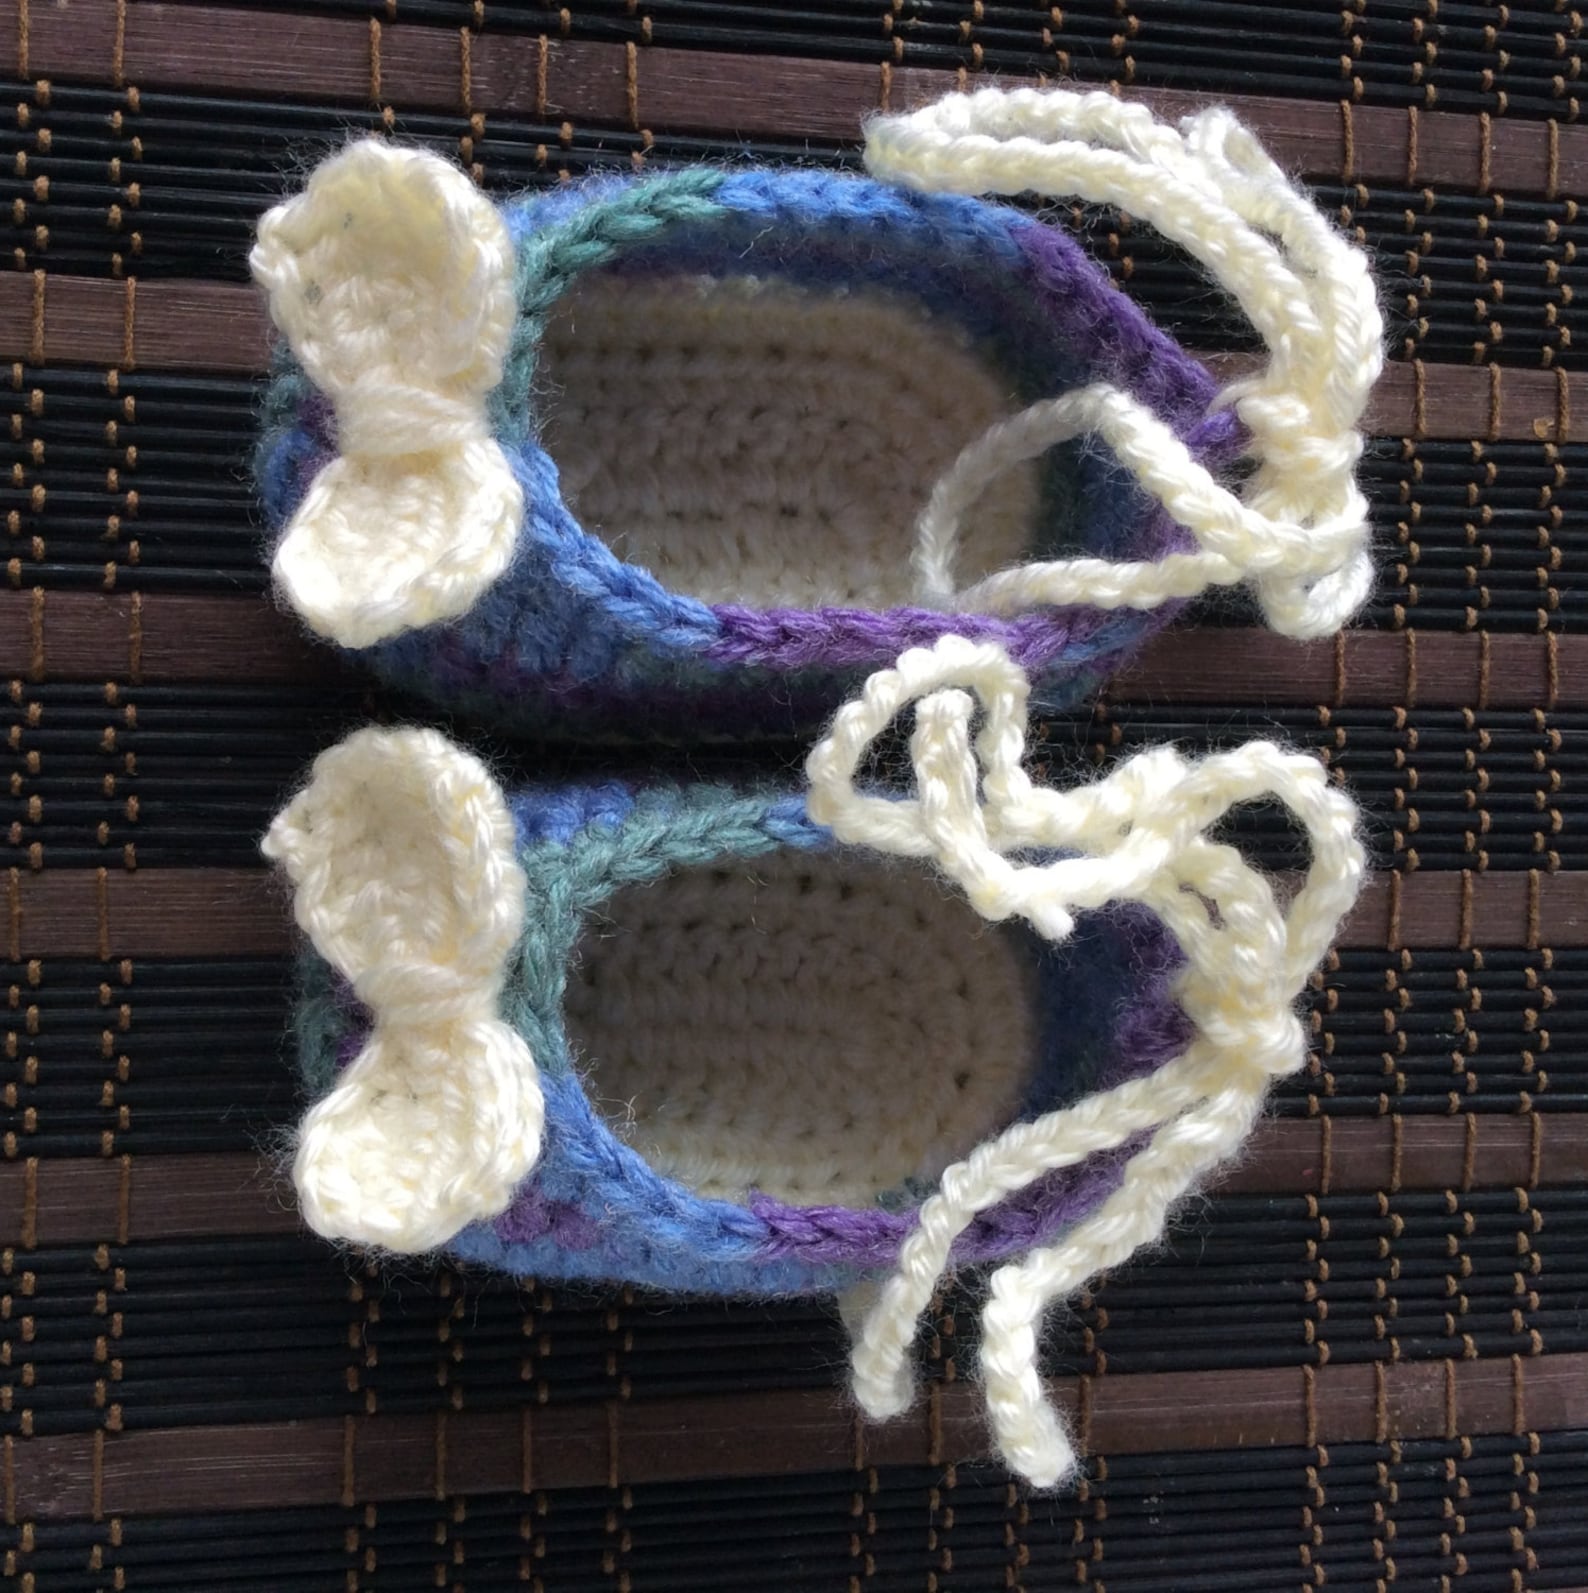 crochet baby sandals.baby girl ballerina shoes.crochet ballet shoes for baby girls.baby girl shoes.baby bow shoes.newborn shoes.